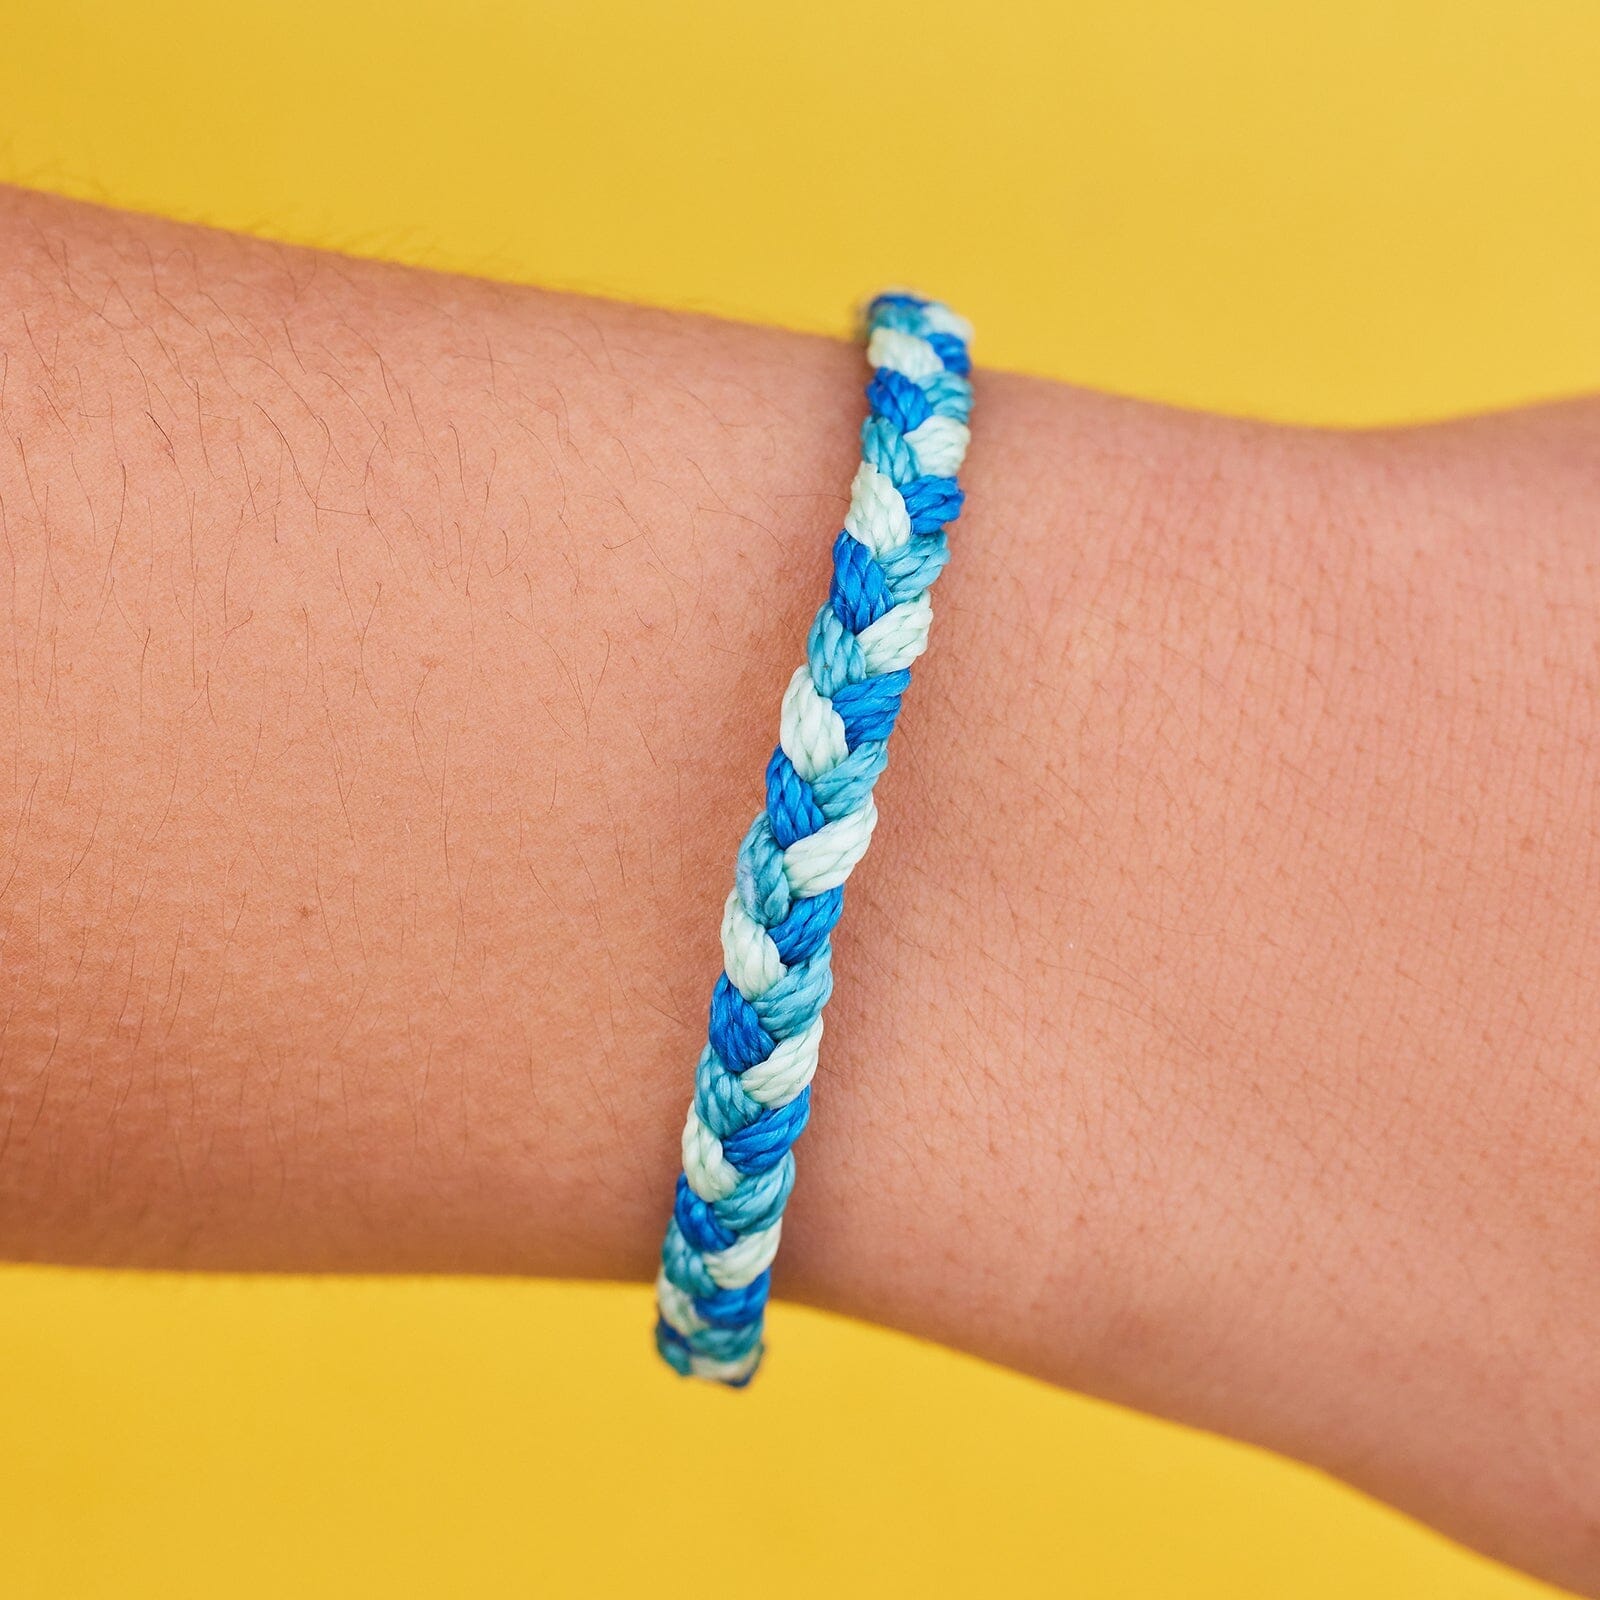 Swifties' raise popularity of friendship bracelets, but are they eco- friendly? - The Weather Network